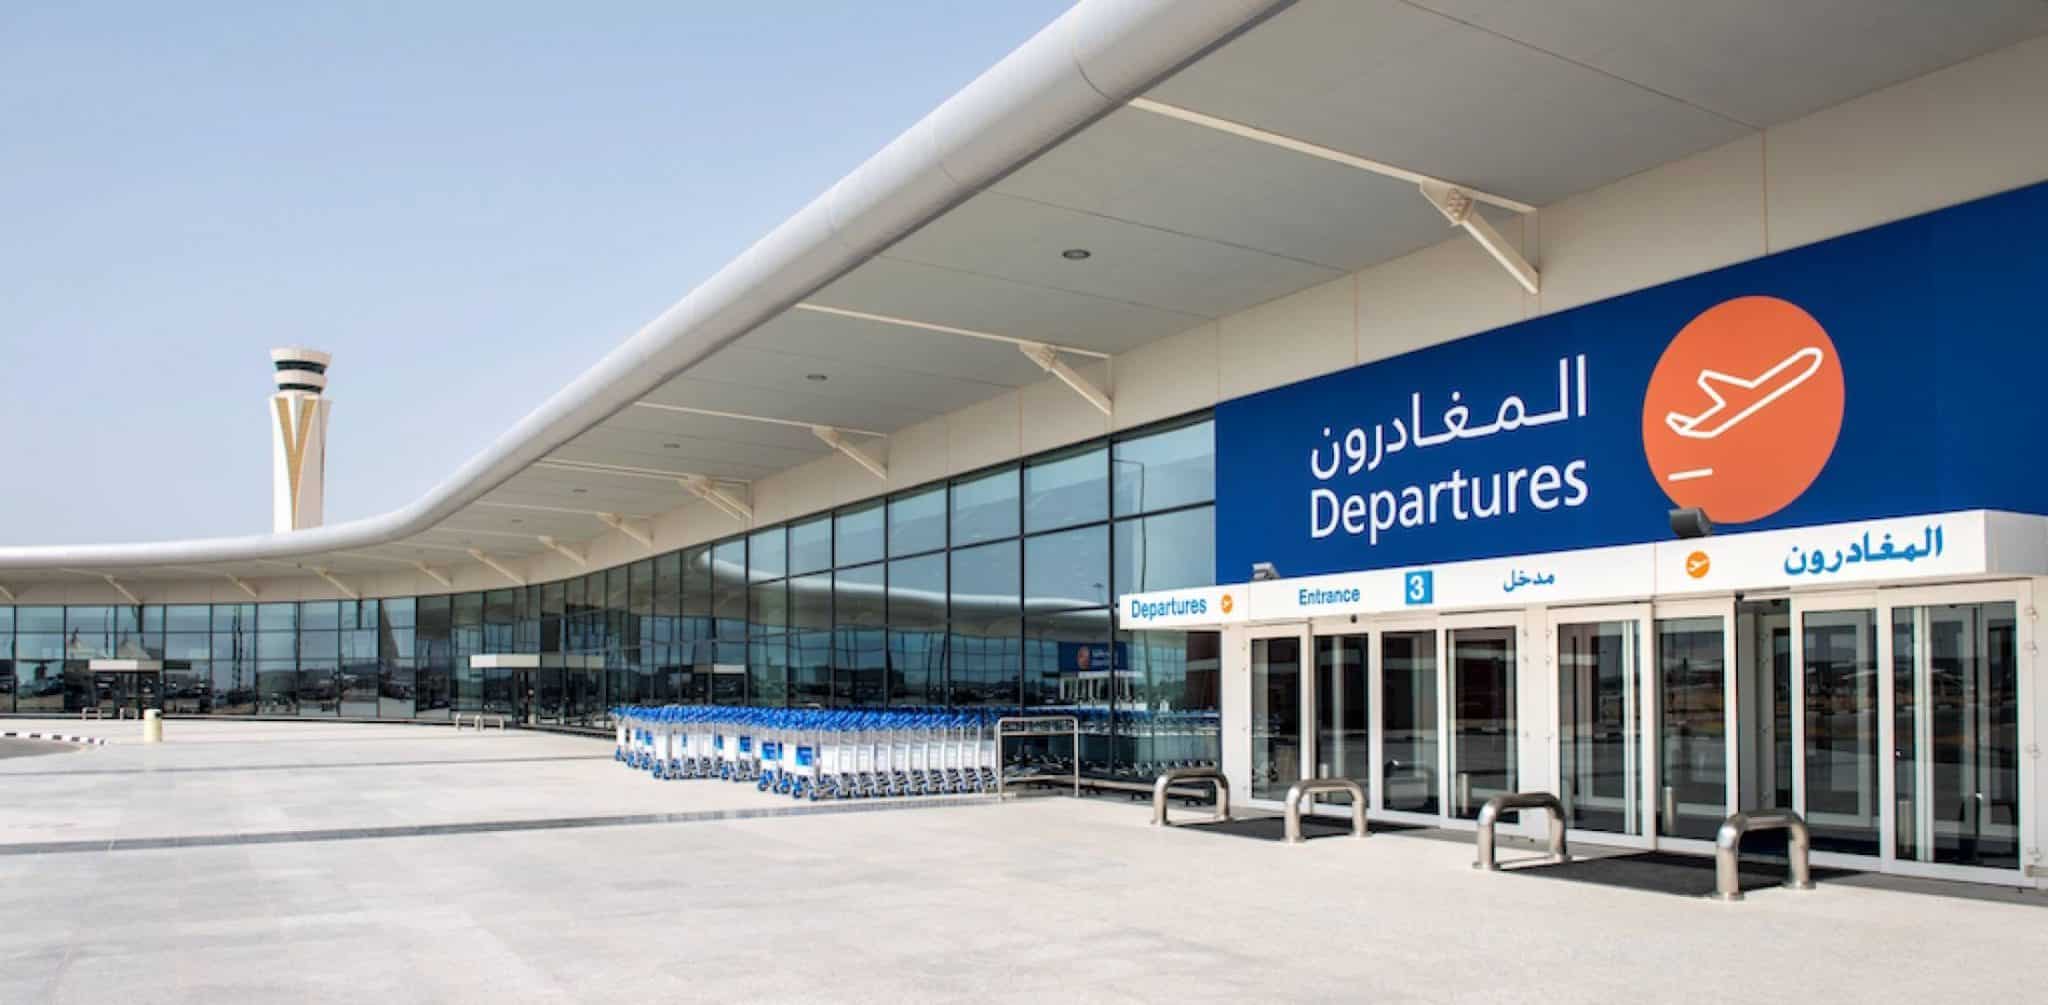 departures-at-dwc-dubai-airports-wrench-solutions-project-management-information-system